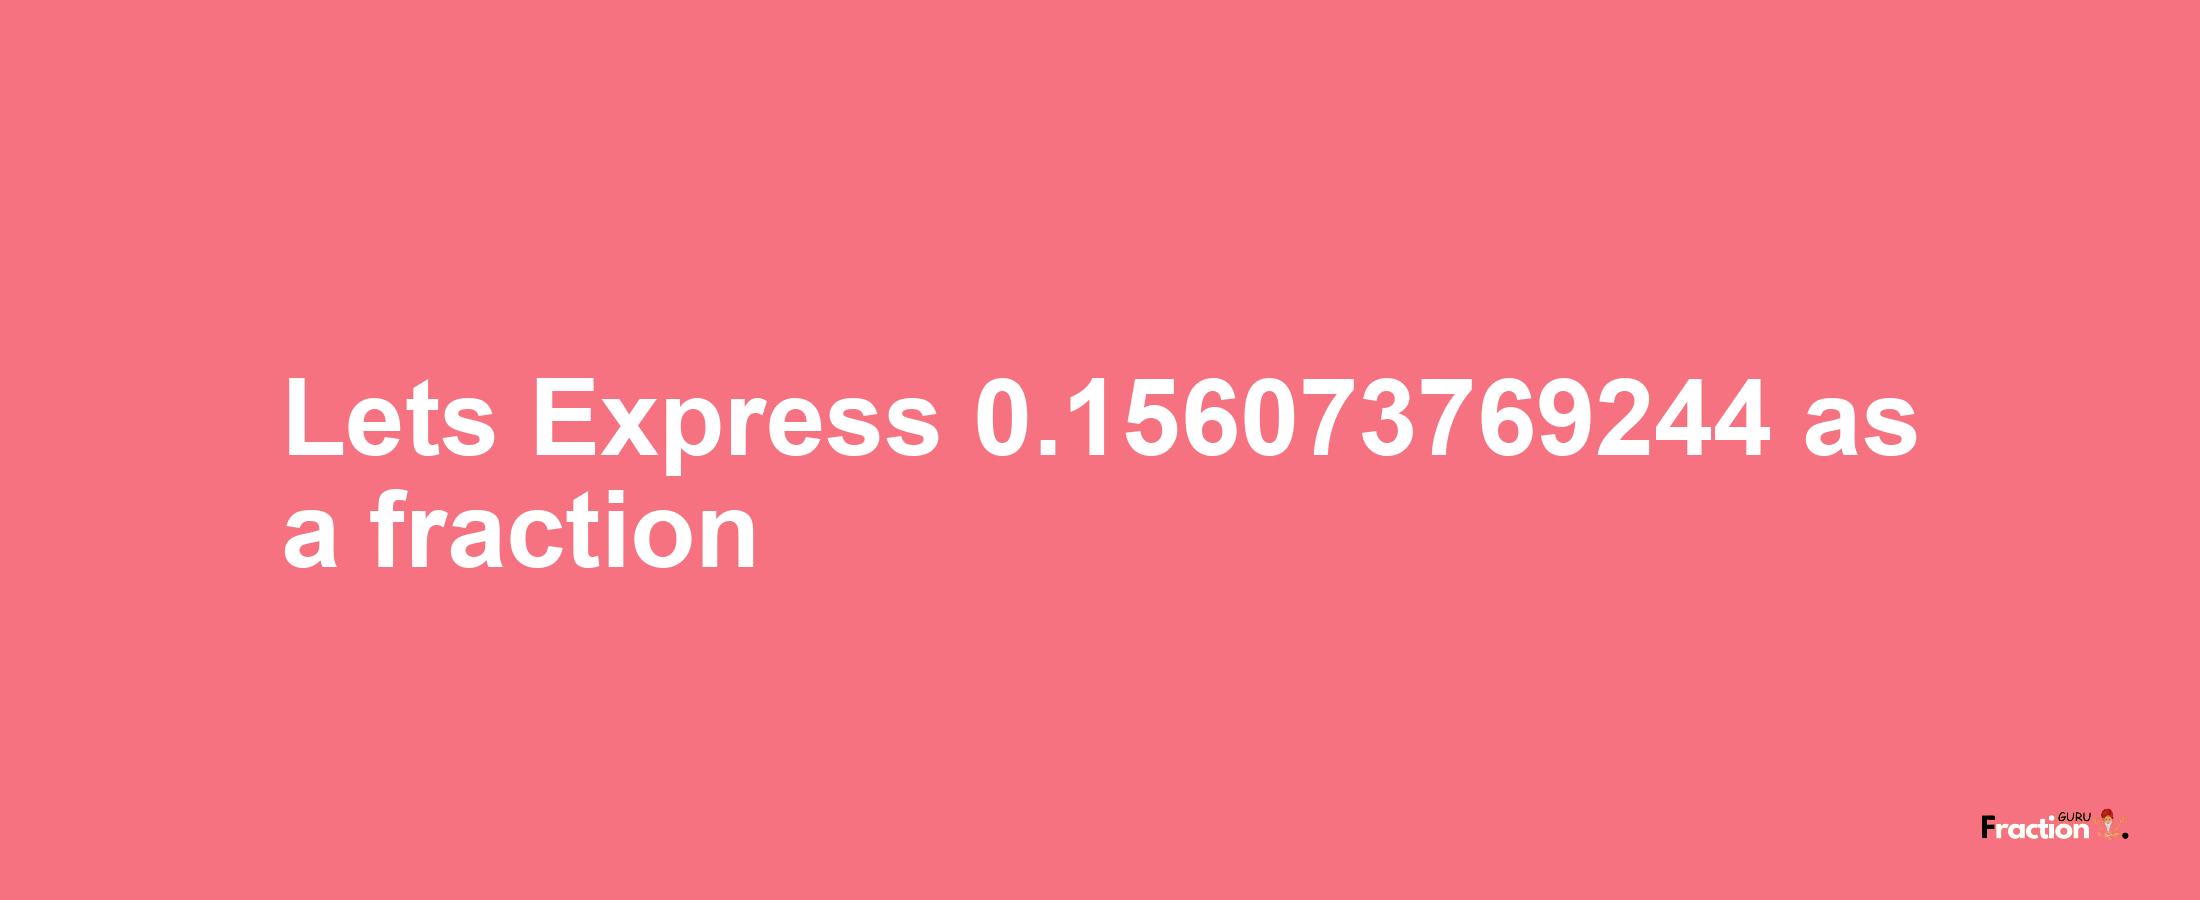 Lets Express 0.156073769244 as afraction